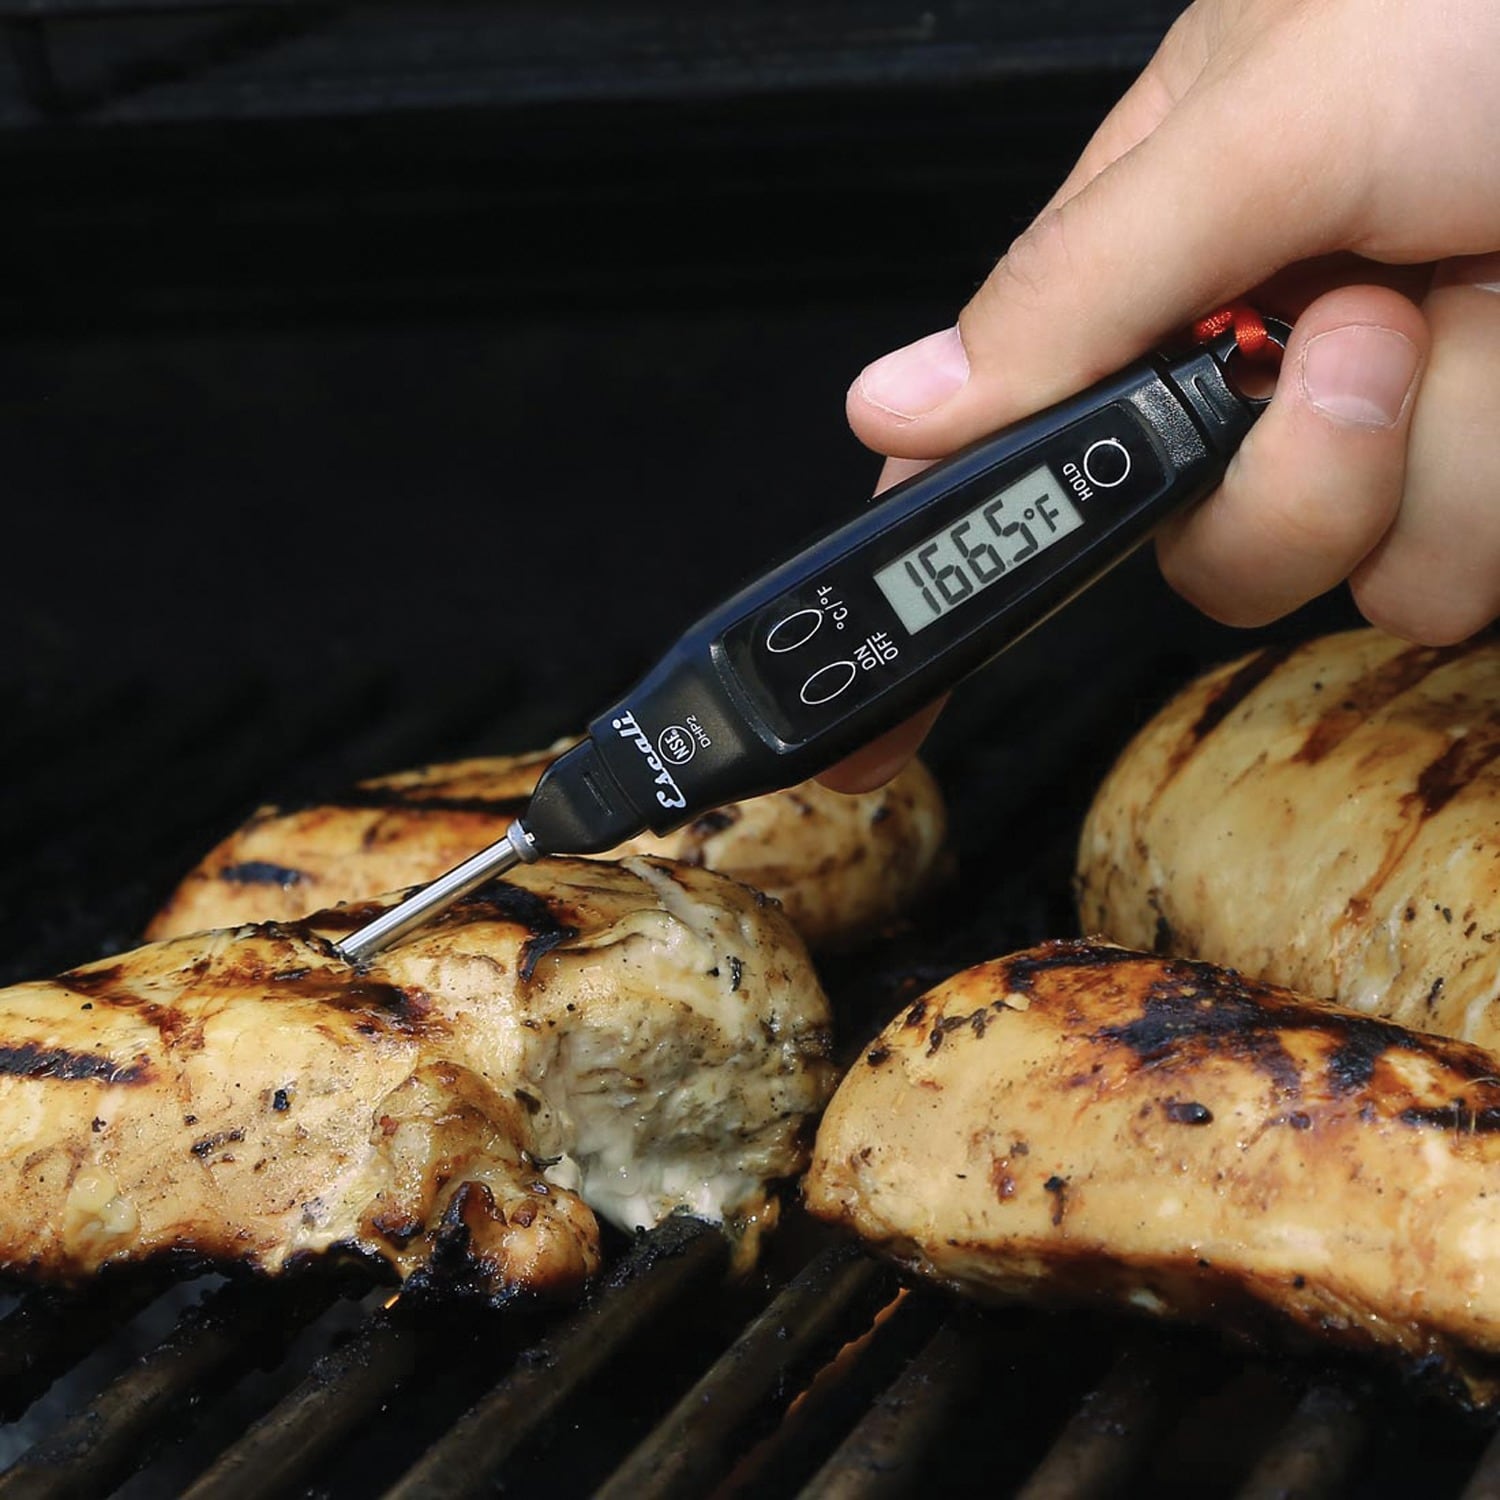  Blackstone 5299 Digital Probe Food Thermometer for Cooking,  Grilling, Meat, Frying, Baking, BBQ, Griddle Accessory Instant Read in  Celsius or Fahrenheit - Waterproof, Heat Resistant, Black : Home & Kitchen